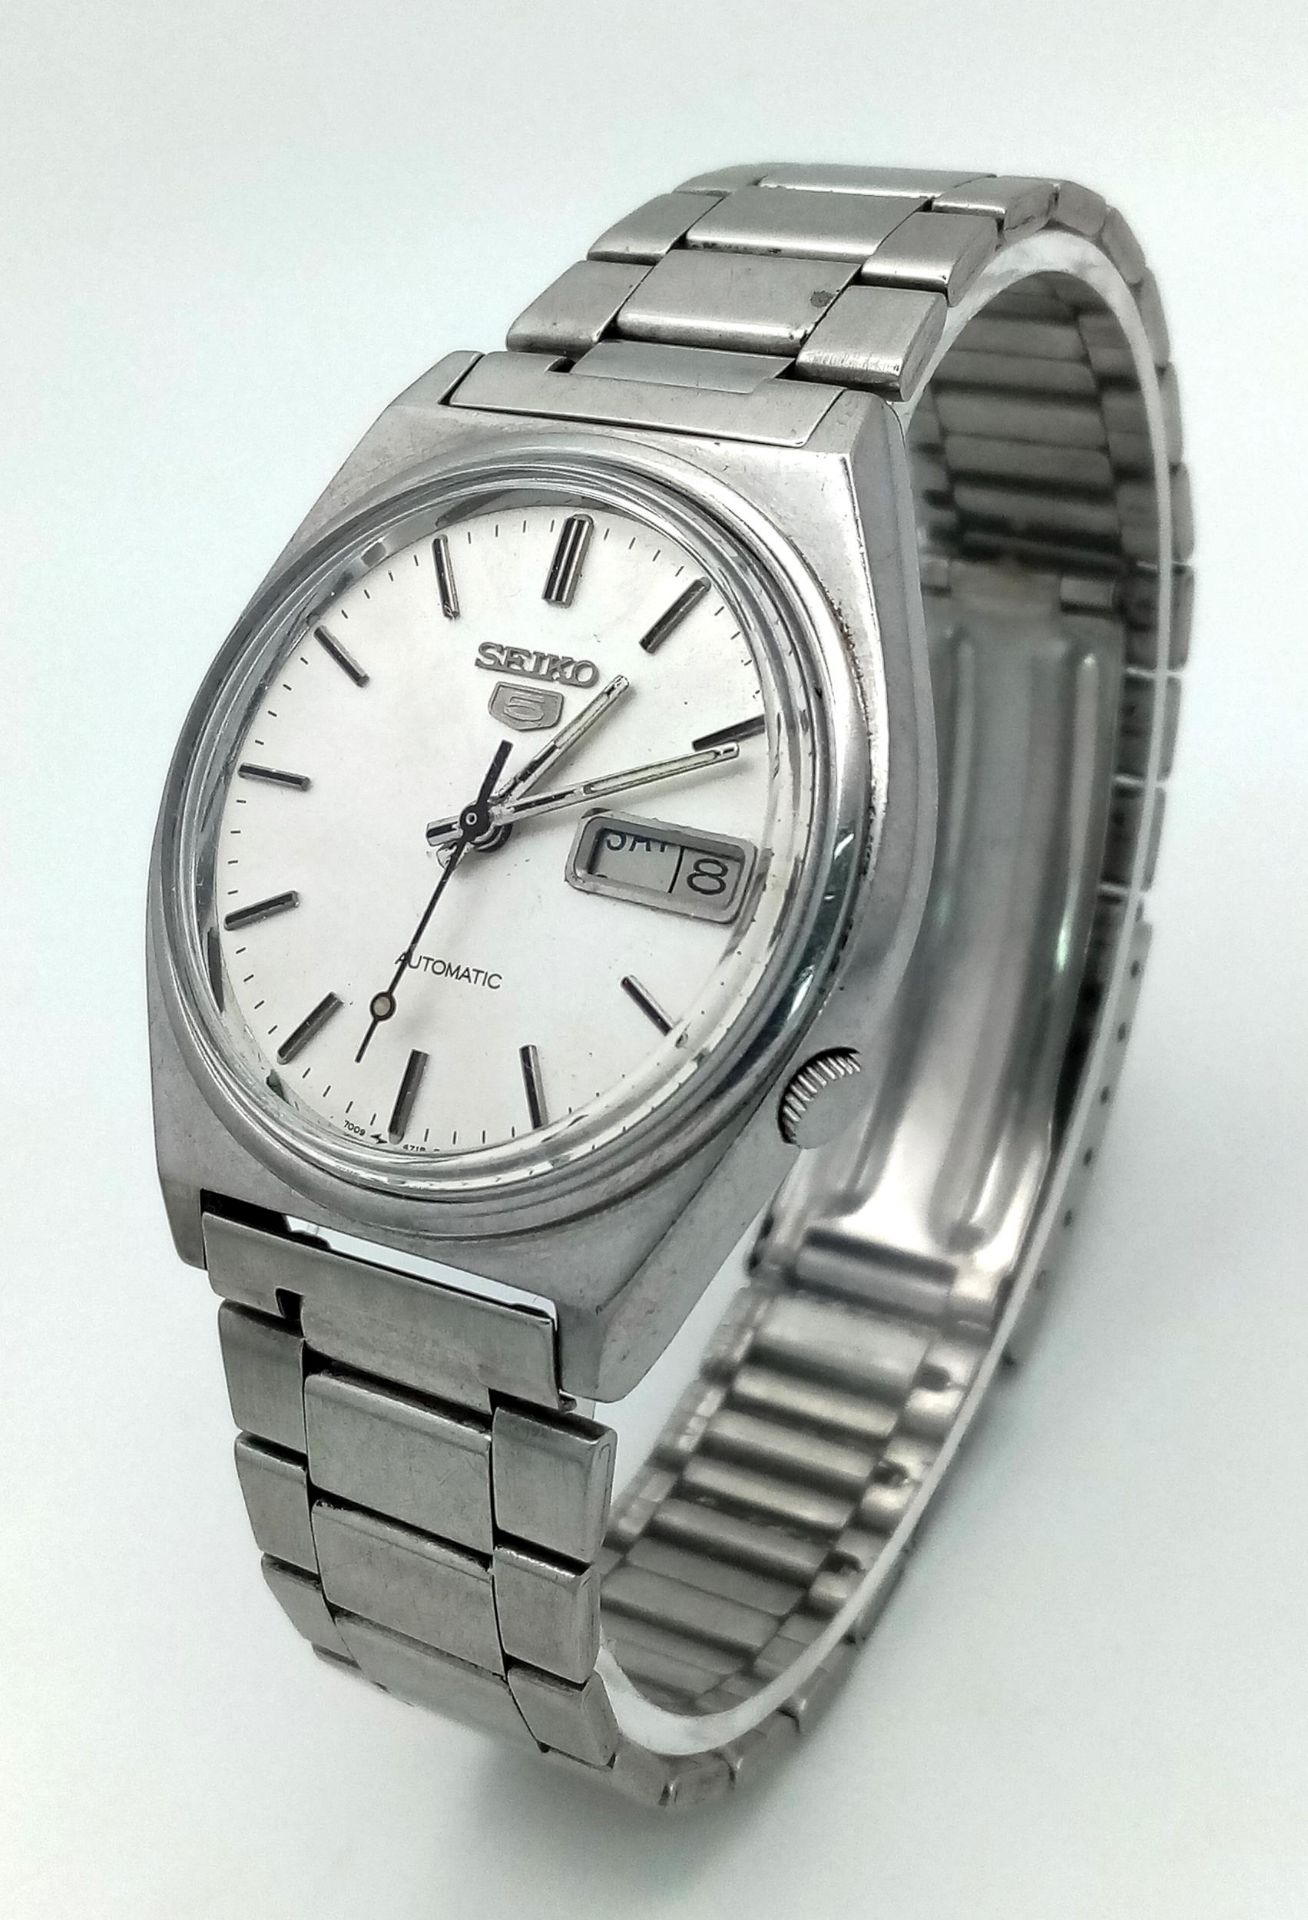 A Vintage Seiko 5 Automatic Gents Watch. Stainless steel bracelet and case - 37mm. Silver tone